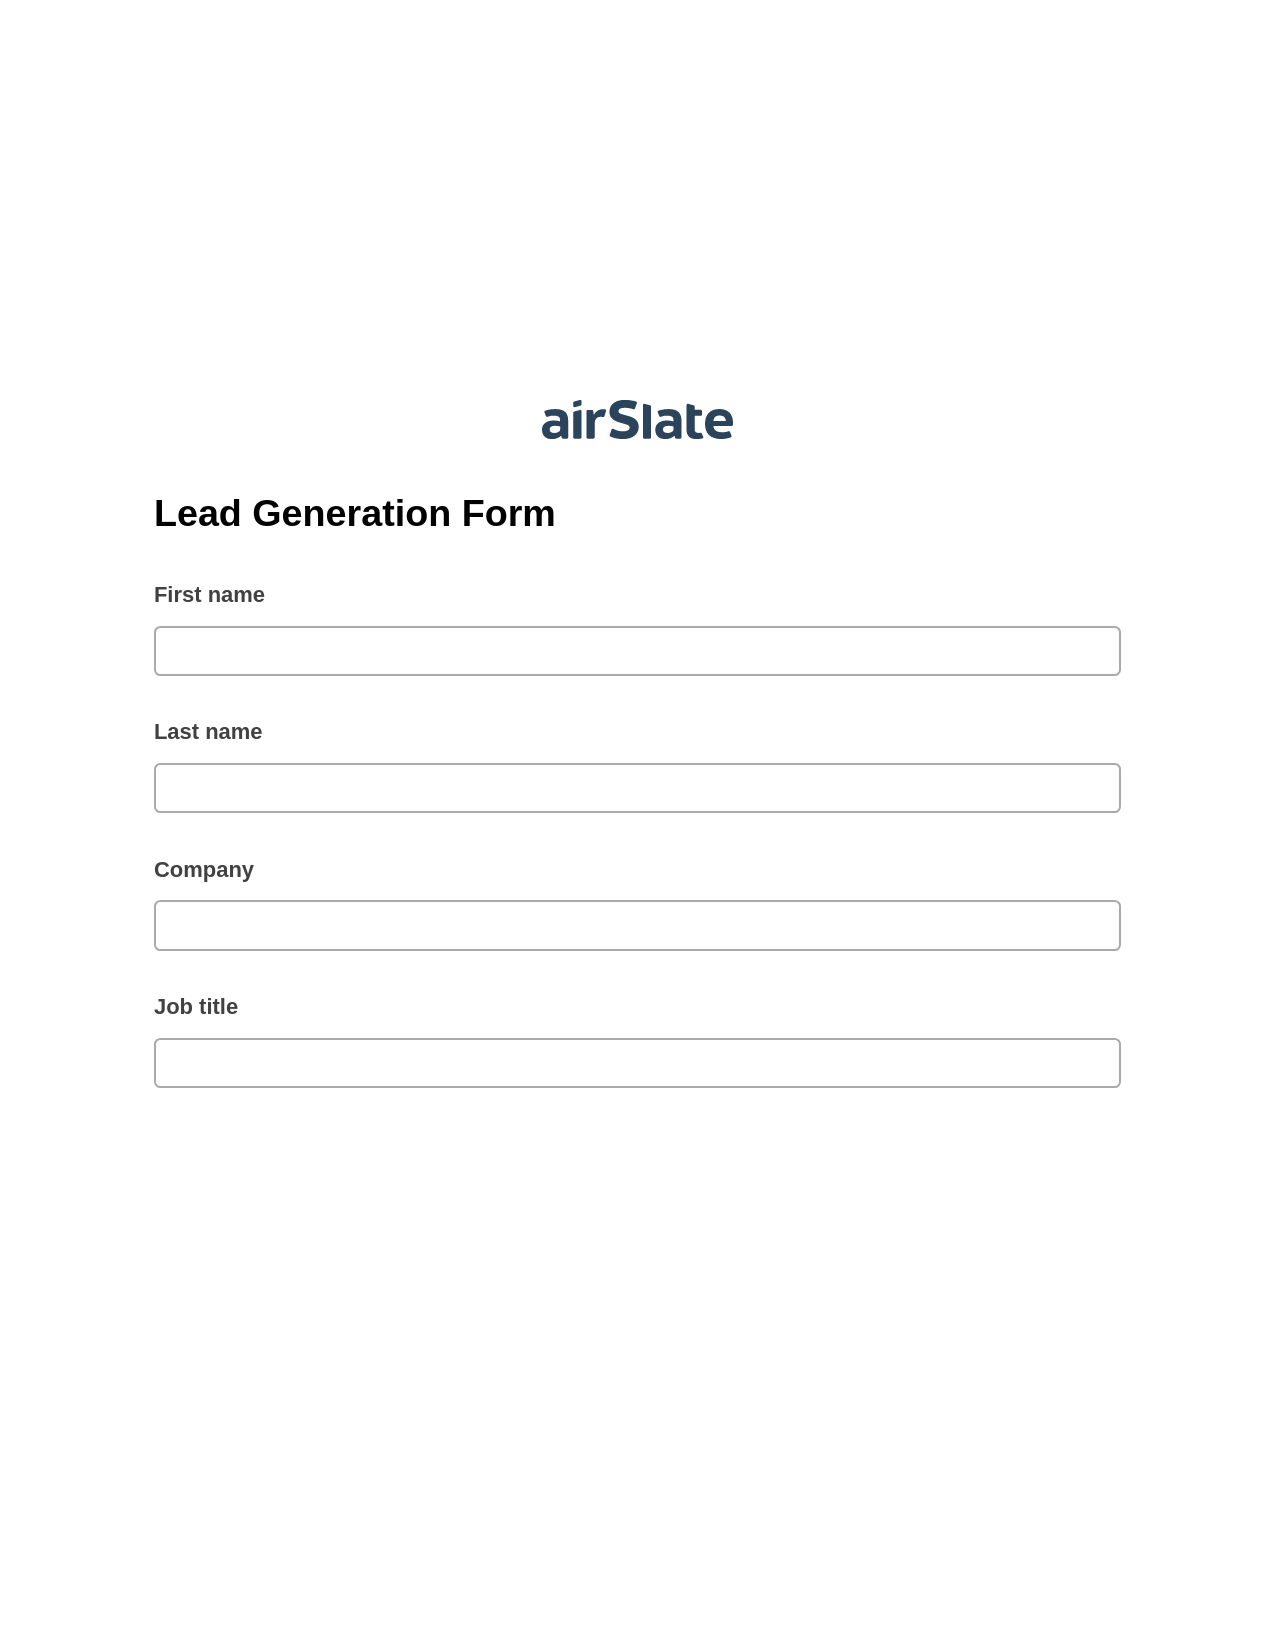 Lead Generation Form Pre-fill from MS Dynamics 365 Records, Remove Slate Bot, Export to NetSuite Bot